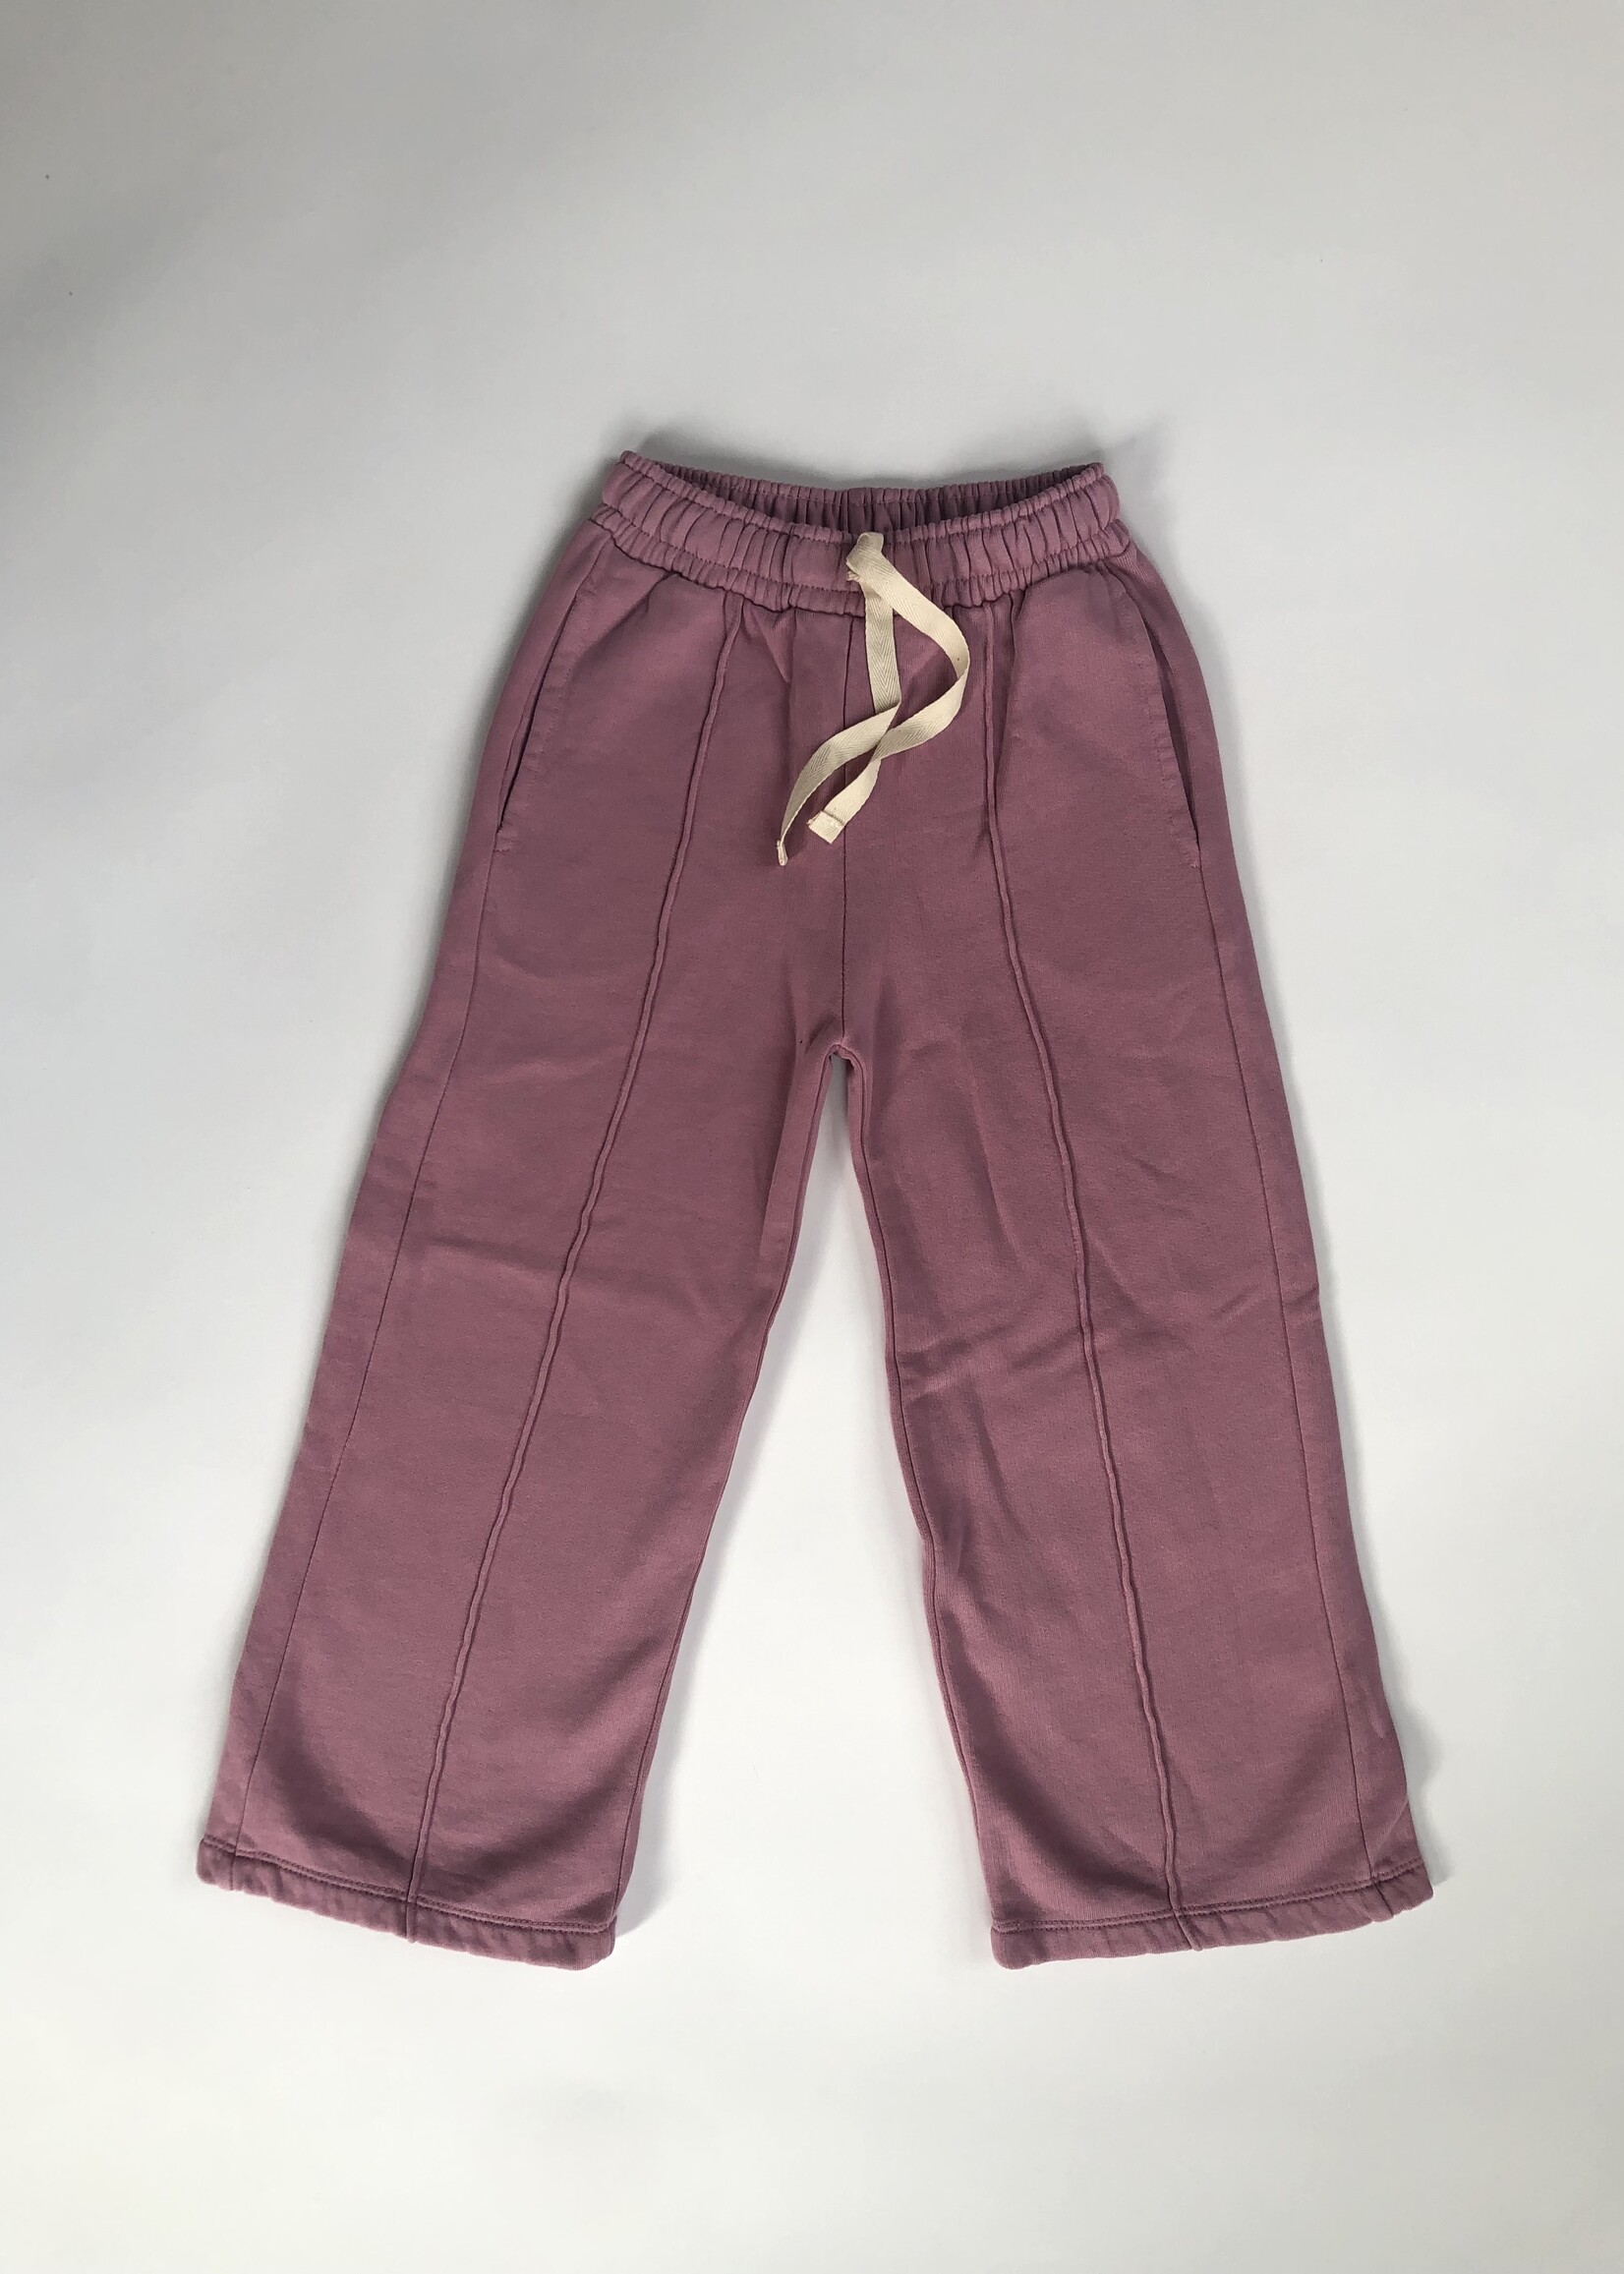 Long Live The Queen Lilac joggers pants 6y